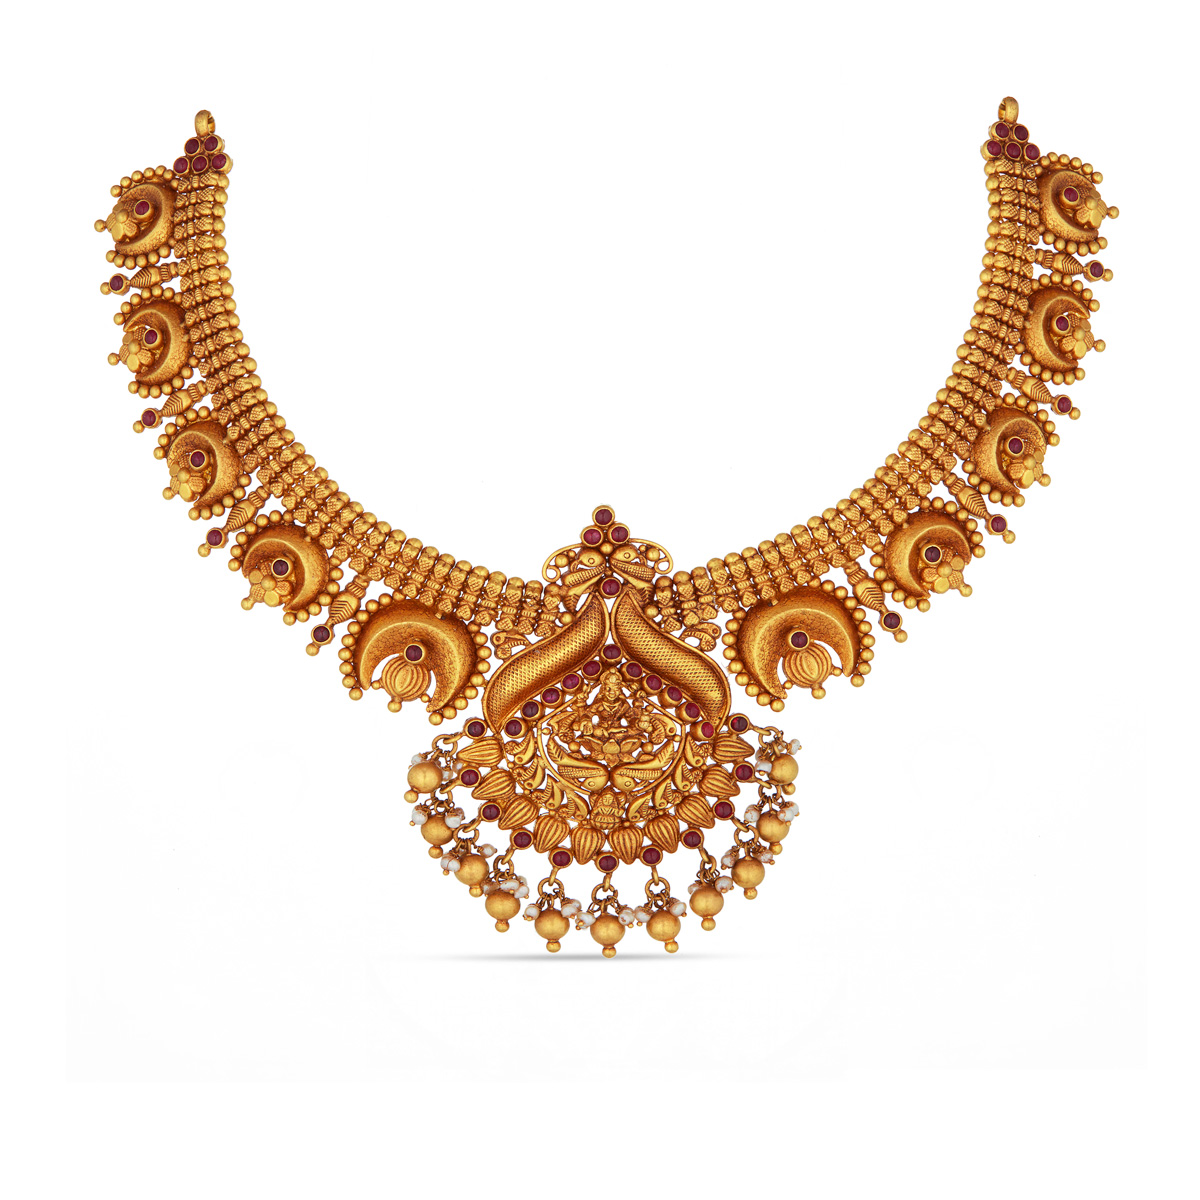 Amidst Gold Short Necklace